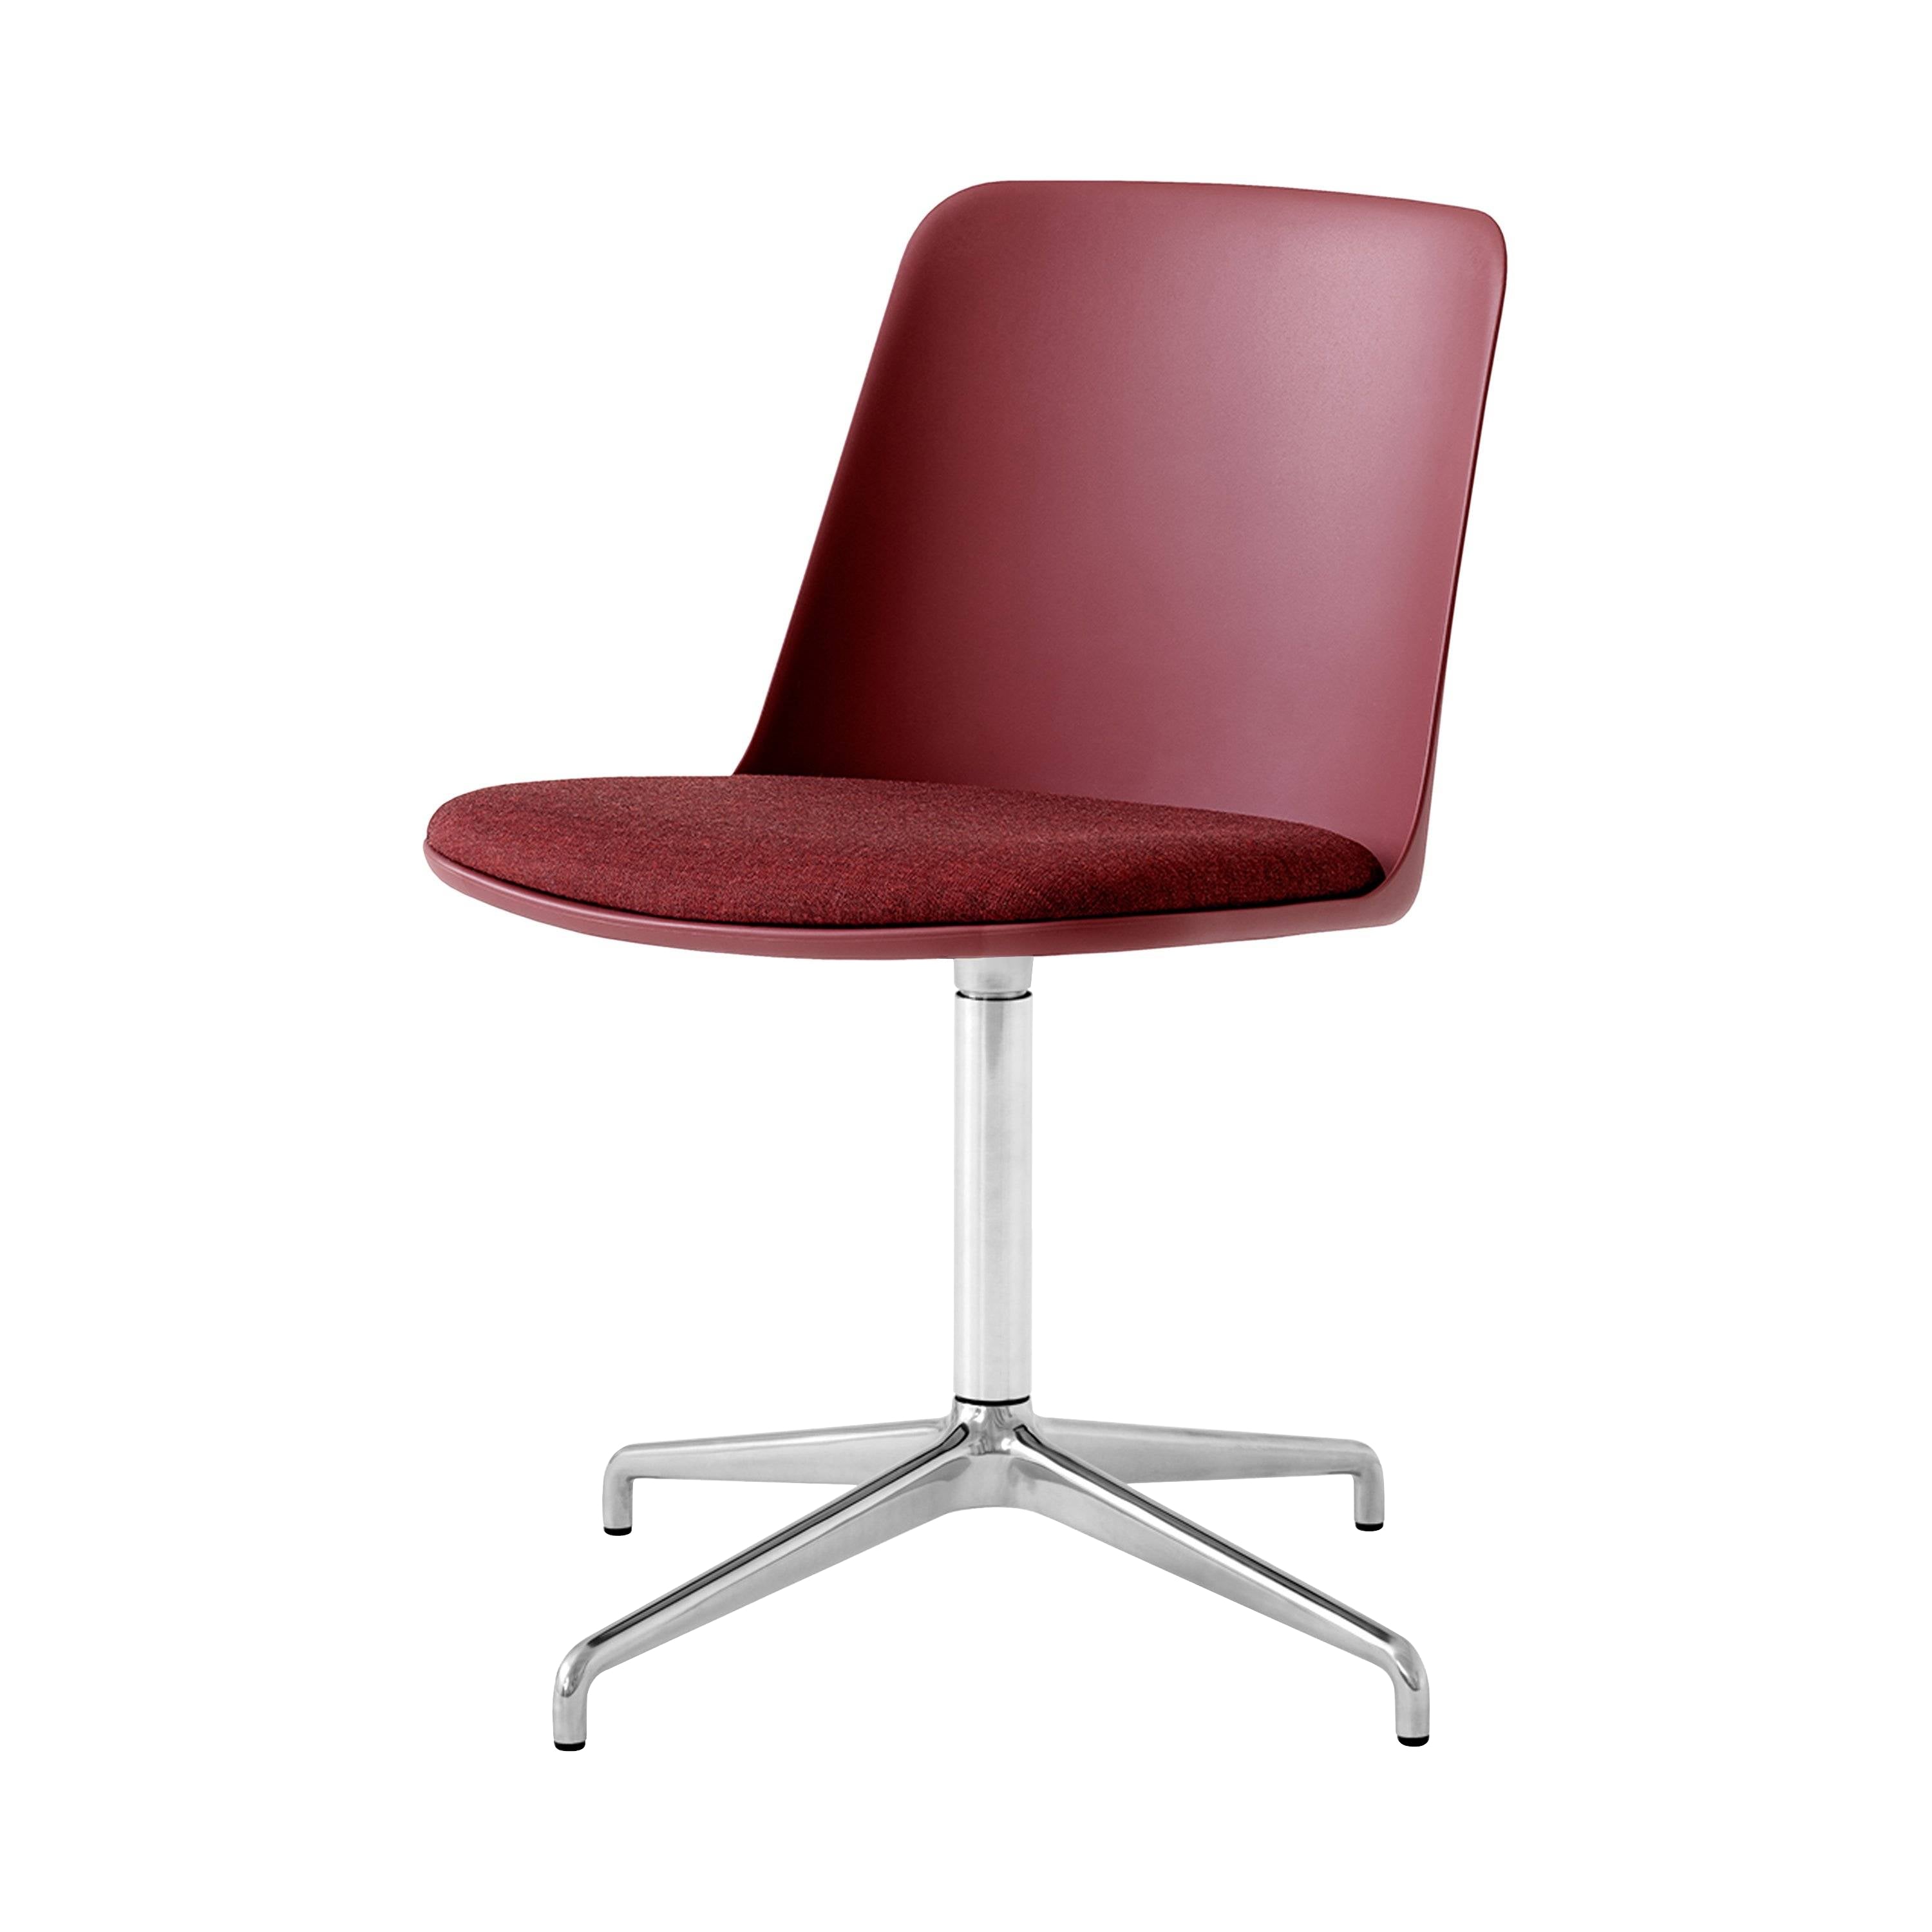 Rely Chair HW17: Aluminum Base + Red Brown